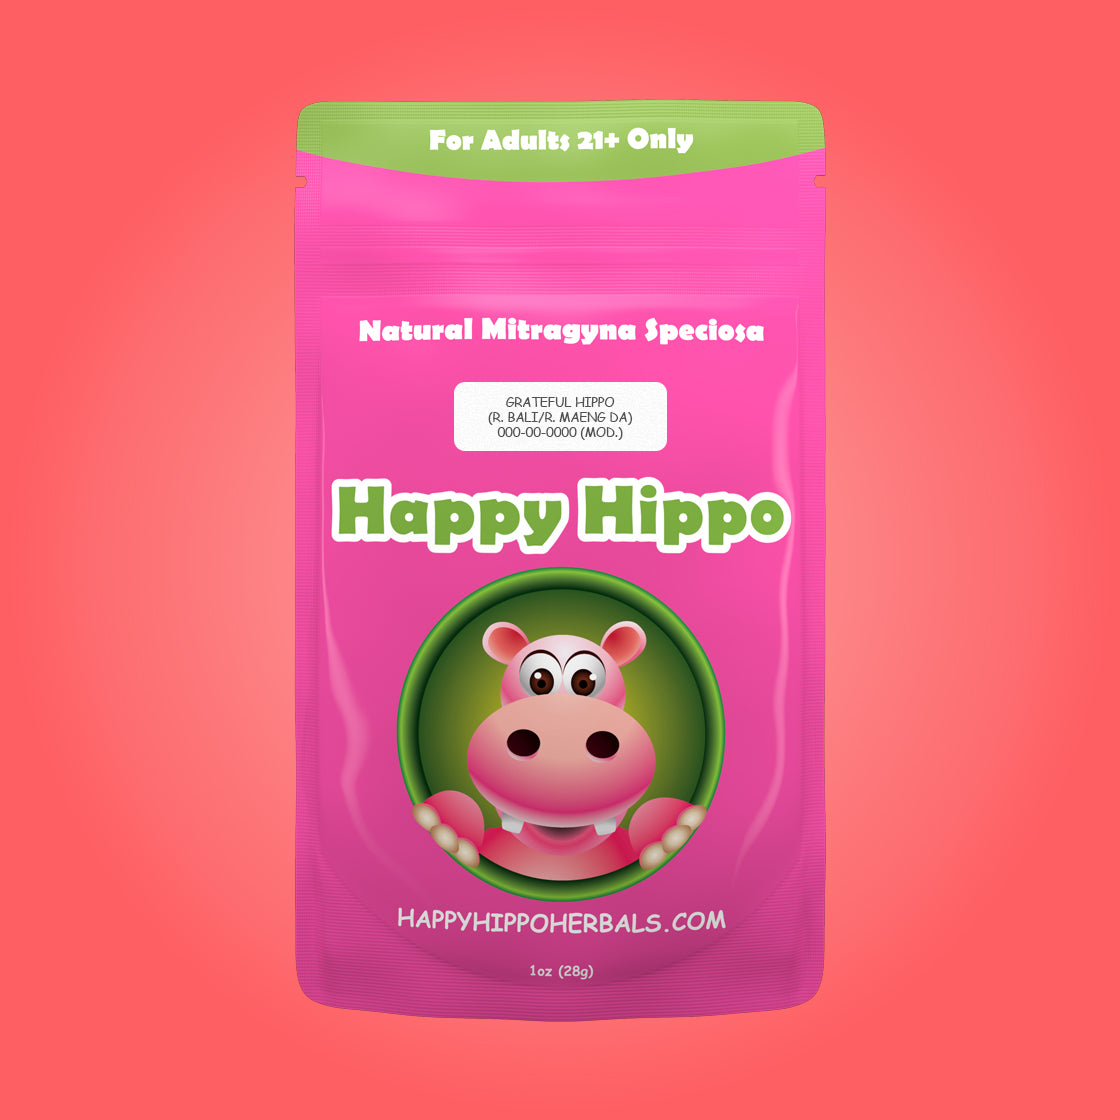 Product Image depicting a 1oz bag of Happy Hippo Red Maeng Da and Red Bali Blended Kratom Powder (Mitragyna Speciosa).